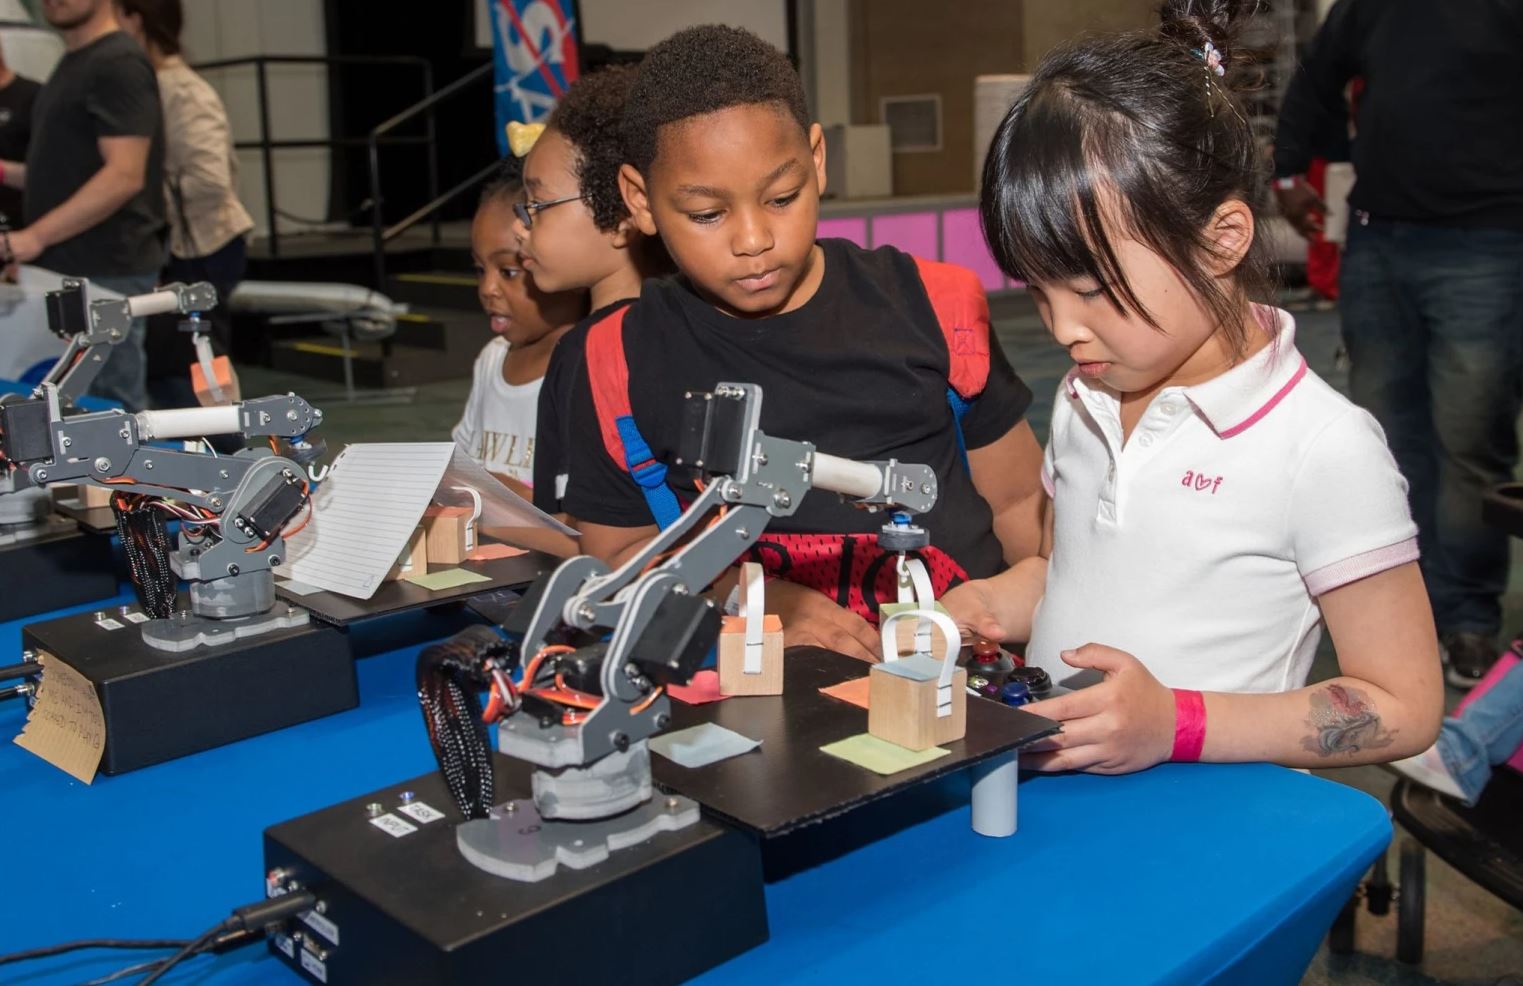 Young students looking at a robotic project